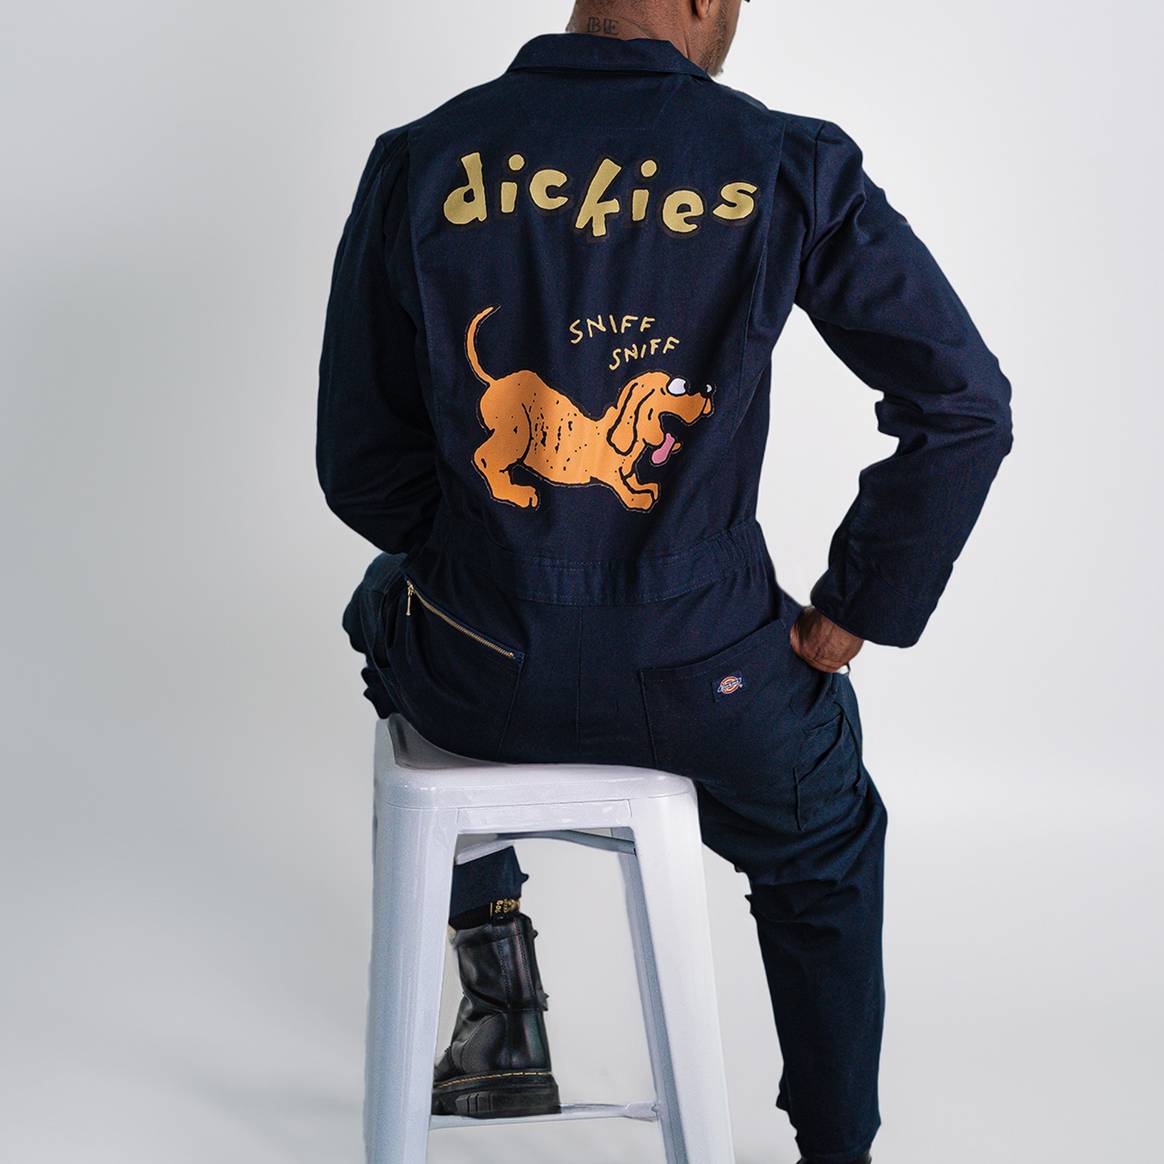 Dickies x Green Day capsule collection